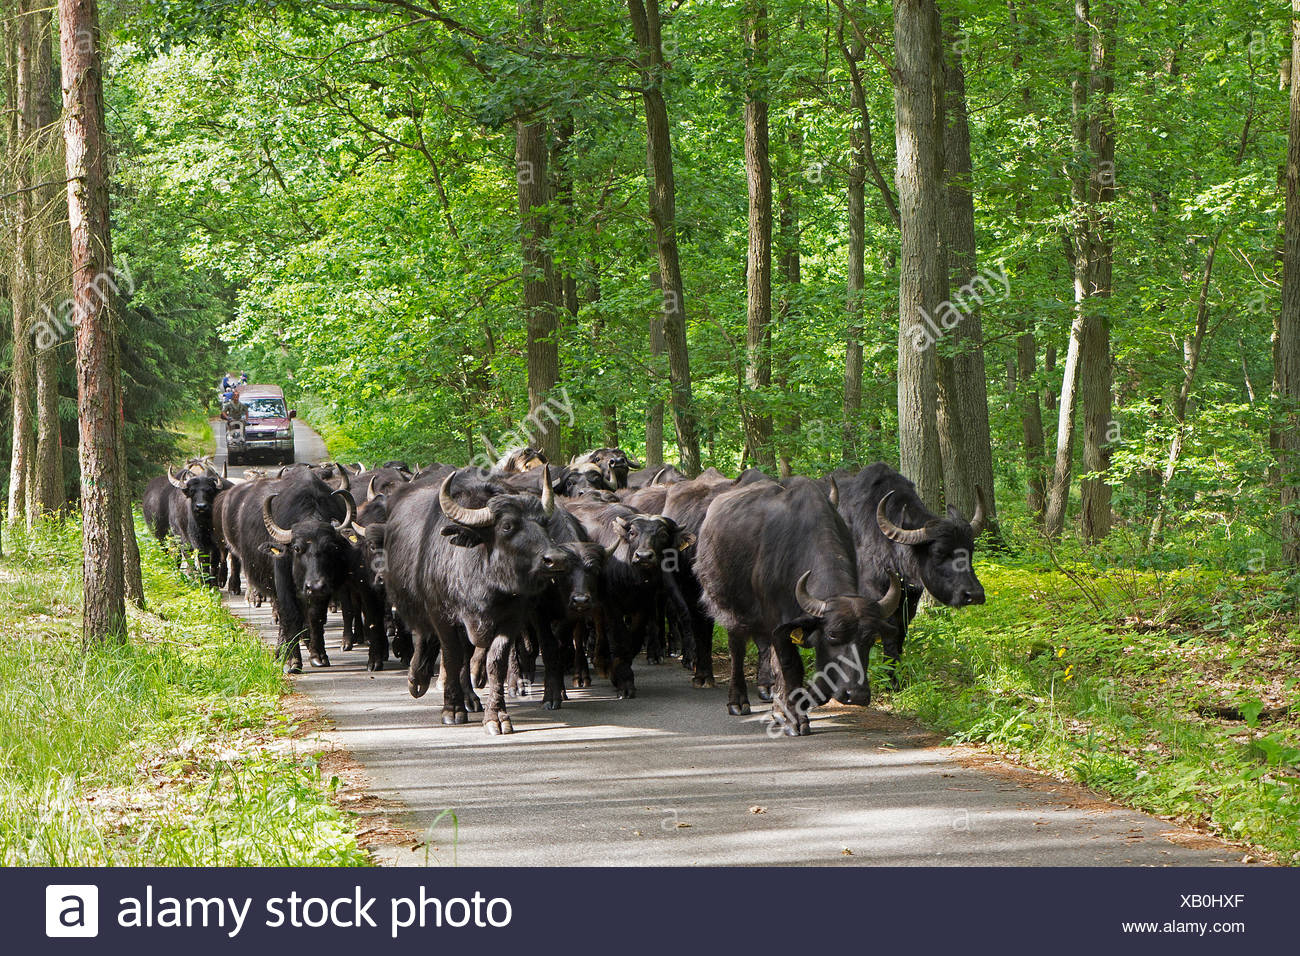 Automobile Buffalo High Resolution Stock Photography and Images - Alamy